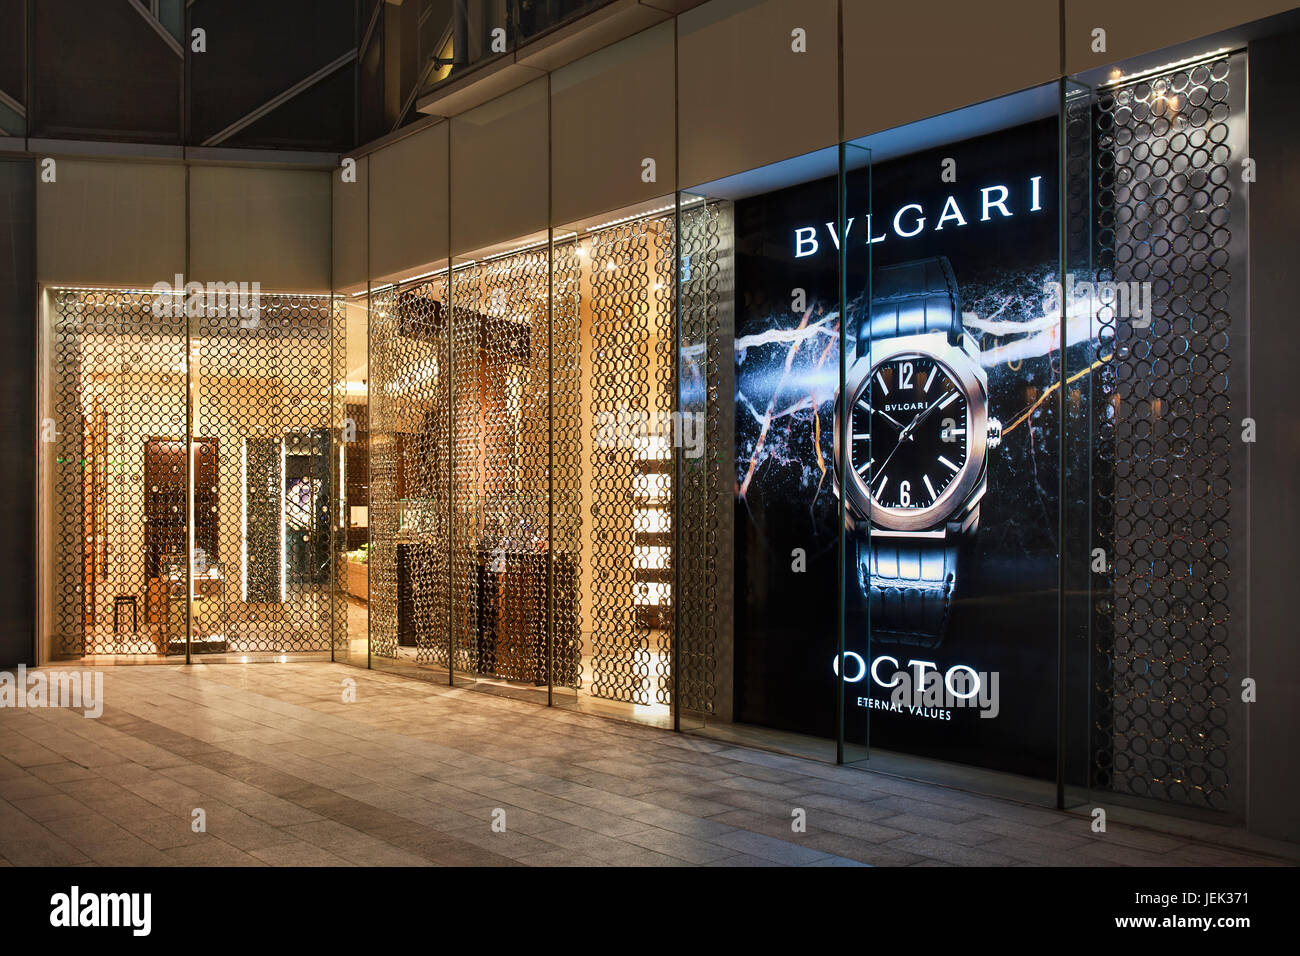 Bulgari outlet at Pudong. Bulgari is a luxury brand with 295 stores worldwide, their jewels, watches and accessories division makes 74% of revenenues. Stock Photo